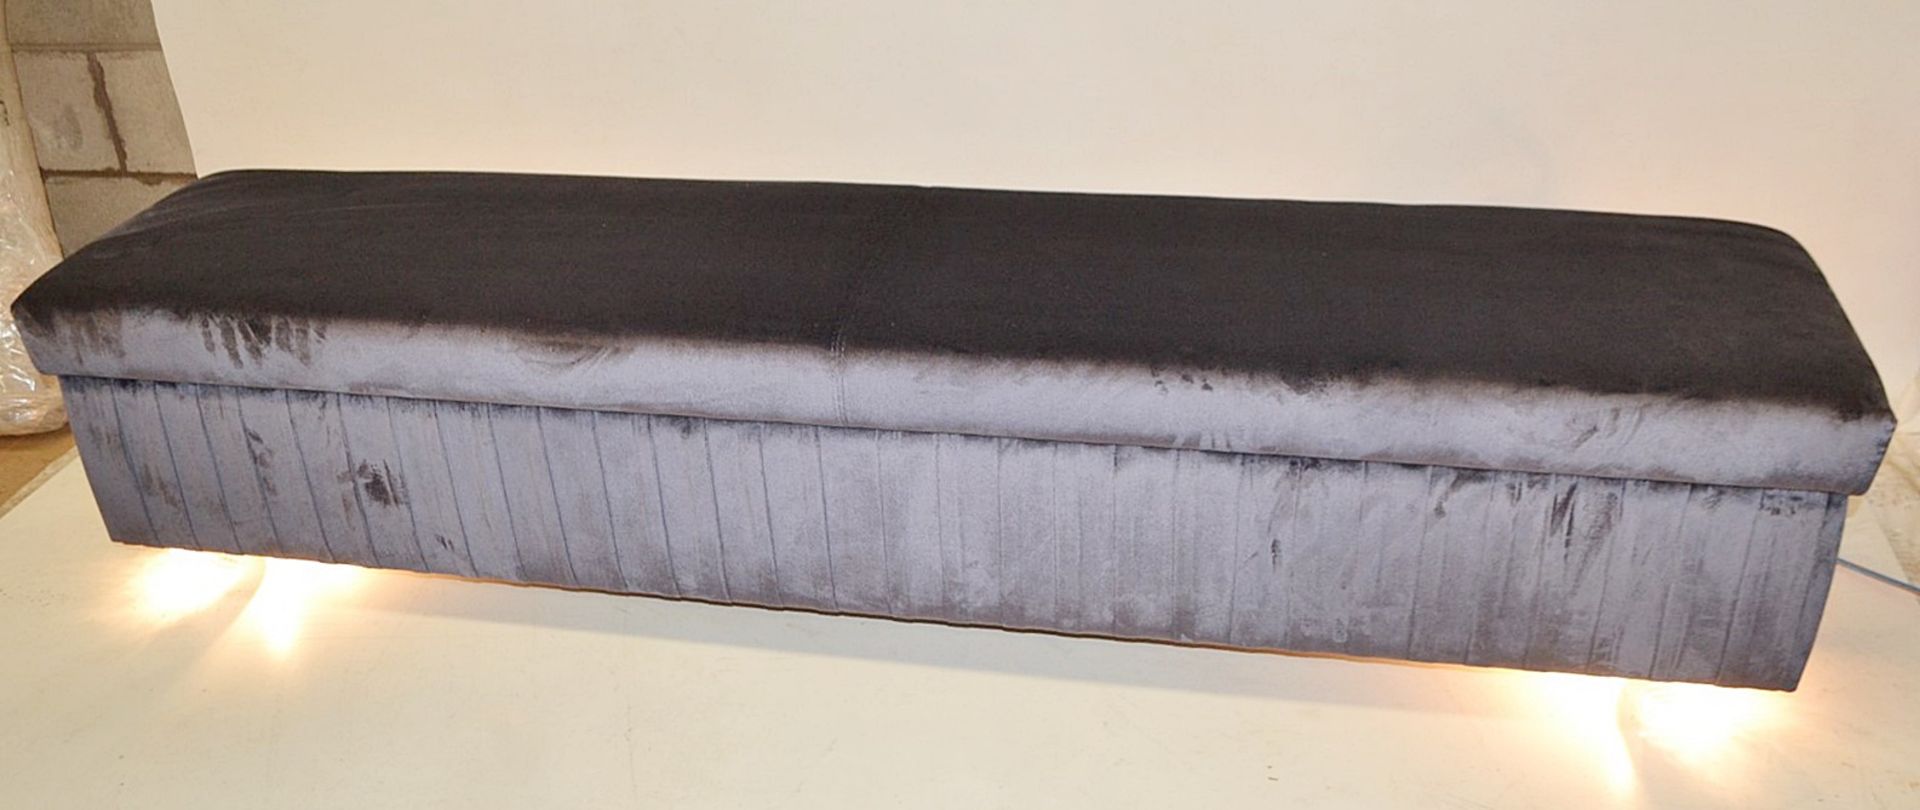 1 x REFLEX 'Plisse' Pleated Ottoman / Bedroom Bench In Plum With 'Illuminated' Spherical Glass Feet - Image 6 of 11